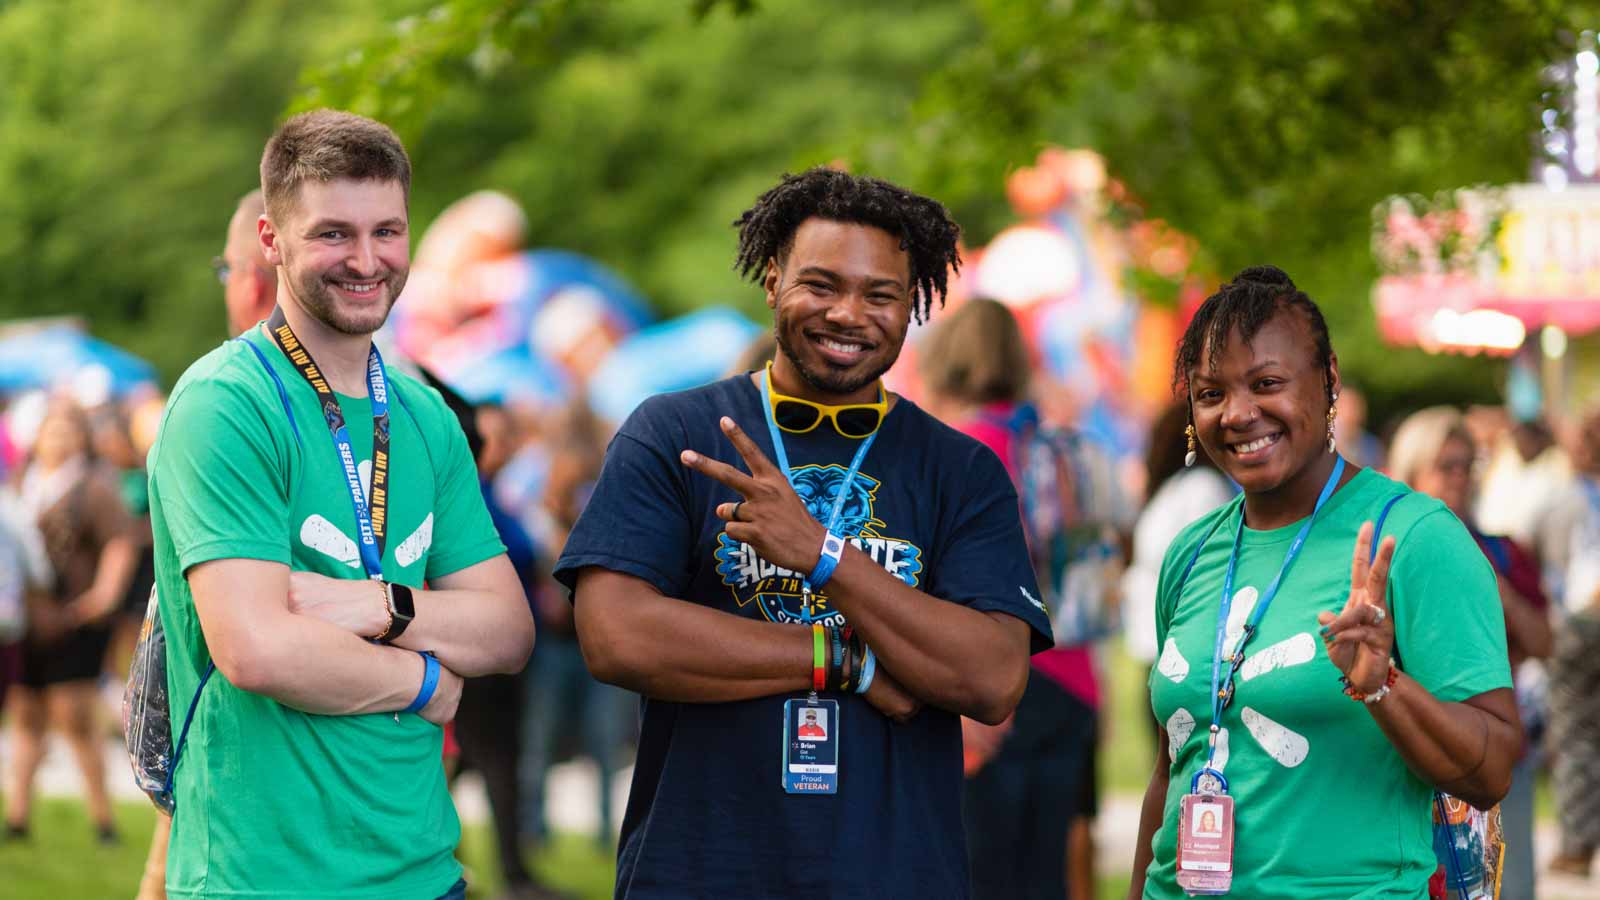 Three Walmart associates pose for a picture outside at a celebration.